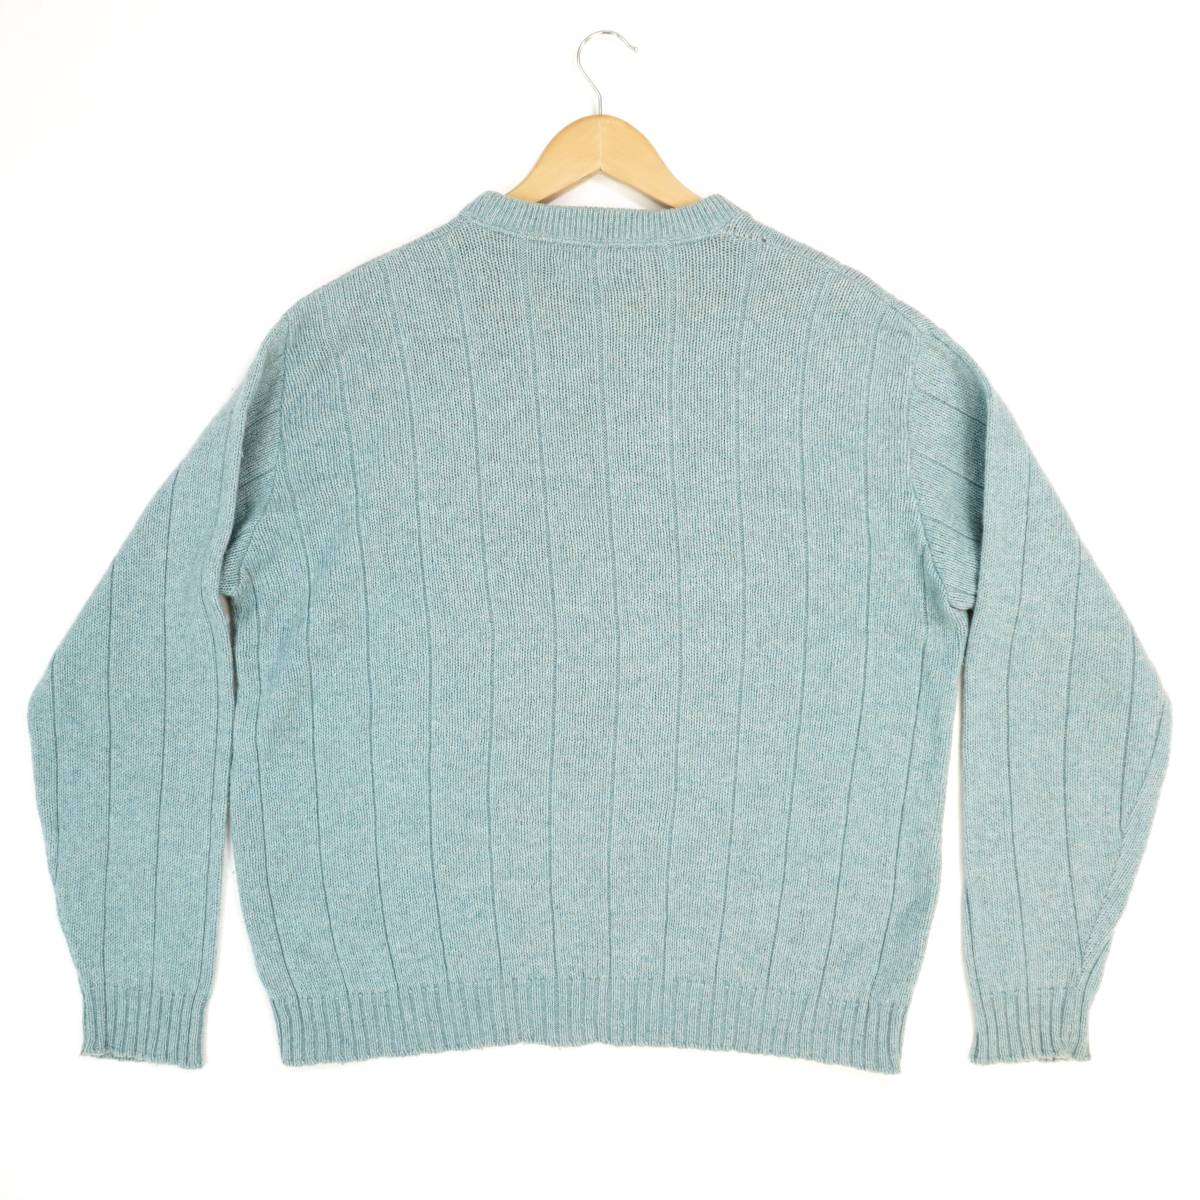 Penneys TOWNCRAFT Sweater 1960s USA SWT2410 Vintage ペニーズ タウンクラフト セーター ニット 1960年代 ヴィンテージ_画像2